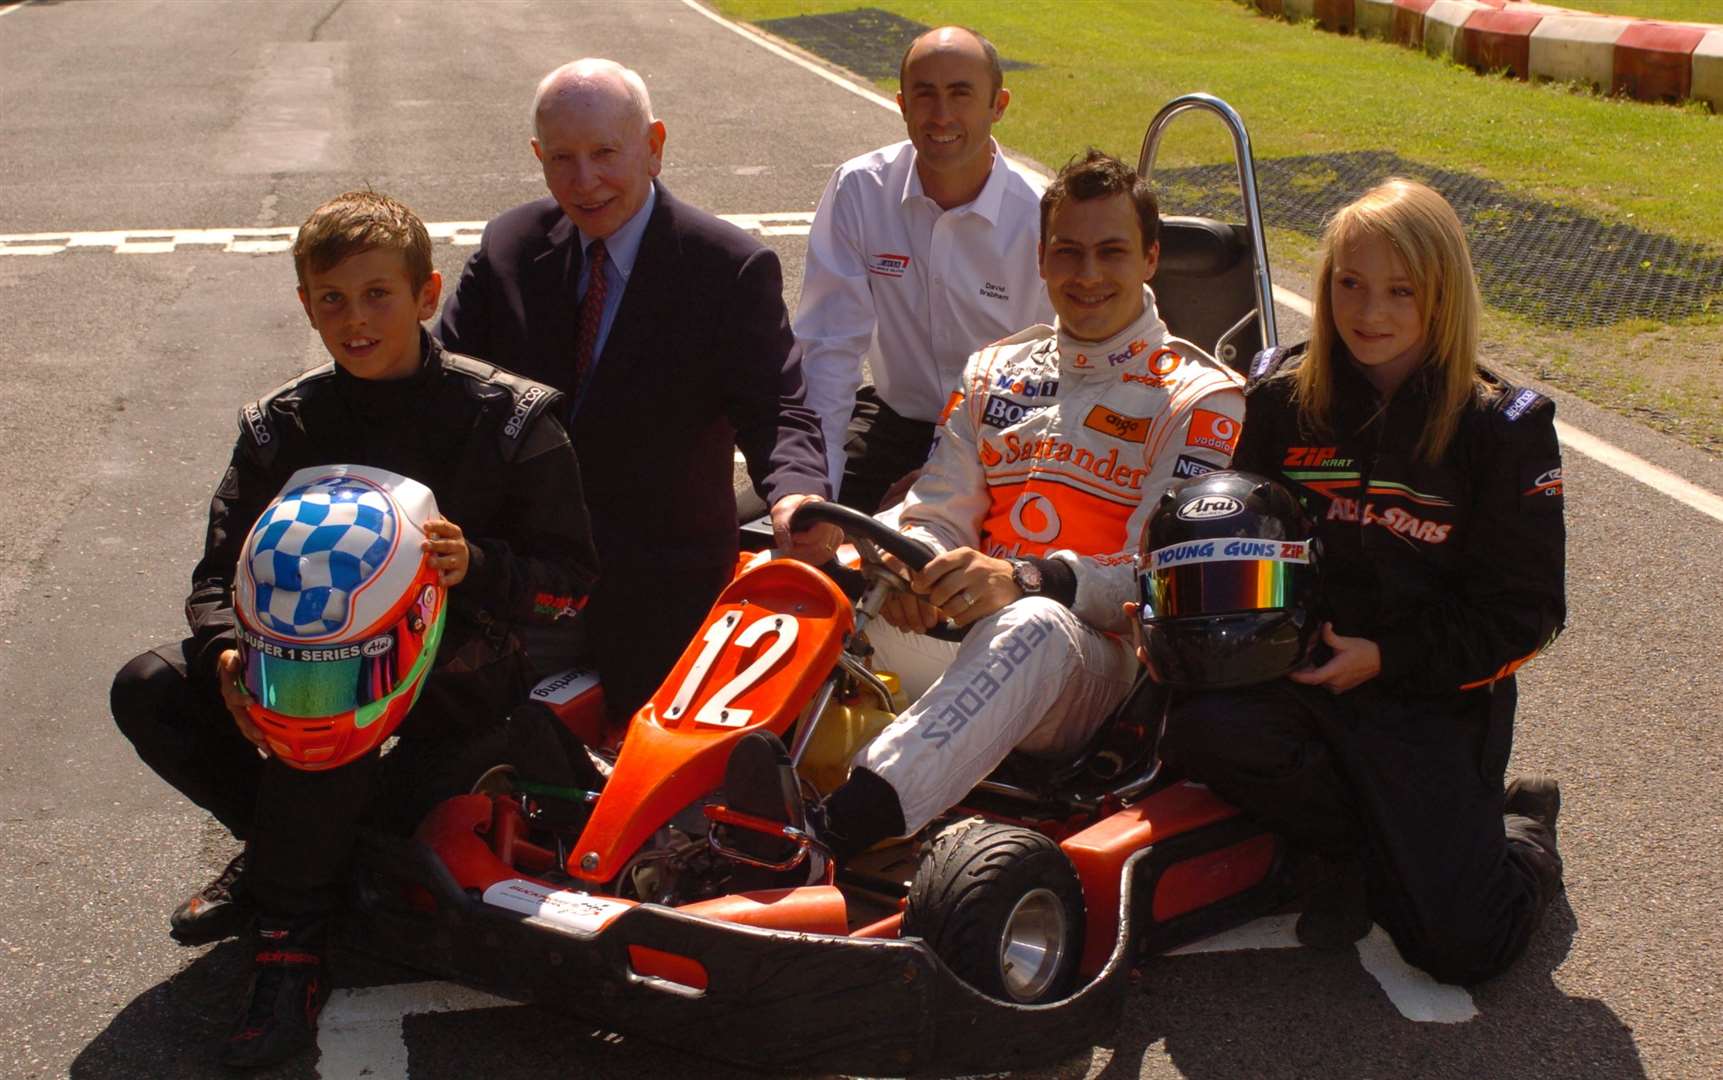 From left to right, Harrison Scott, Surtees, triple Le Mans class winner David Brabham, then-McLaren F1 tester Gary Paffett and Jessica Hawkins in June 2008. Scott, the 2017 Euroformula Open champion, now works with Malvern at the Kokoro Performance company while Hawkins, a W Series racer, made her British Touring Car Championship debut last year. Picture: Steve Crispe